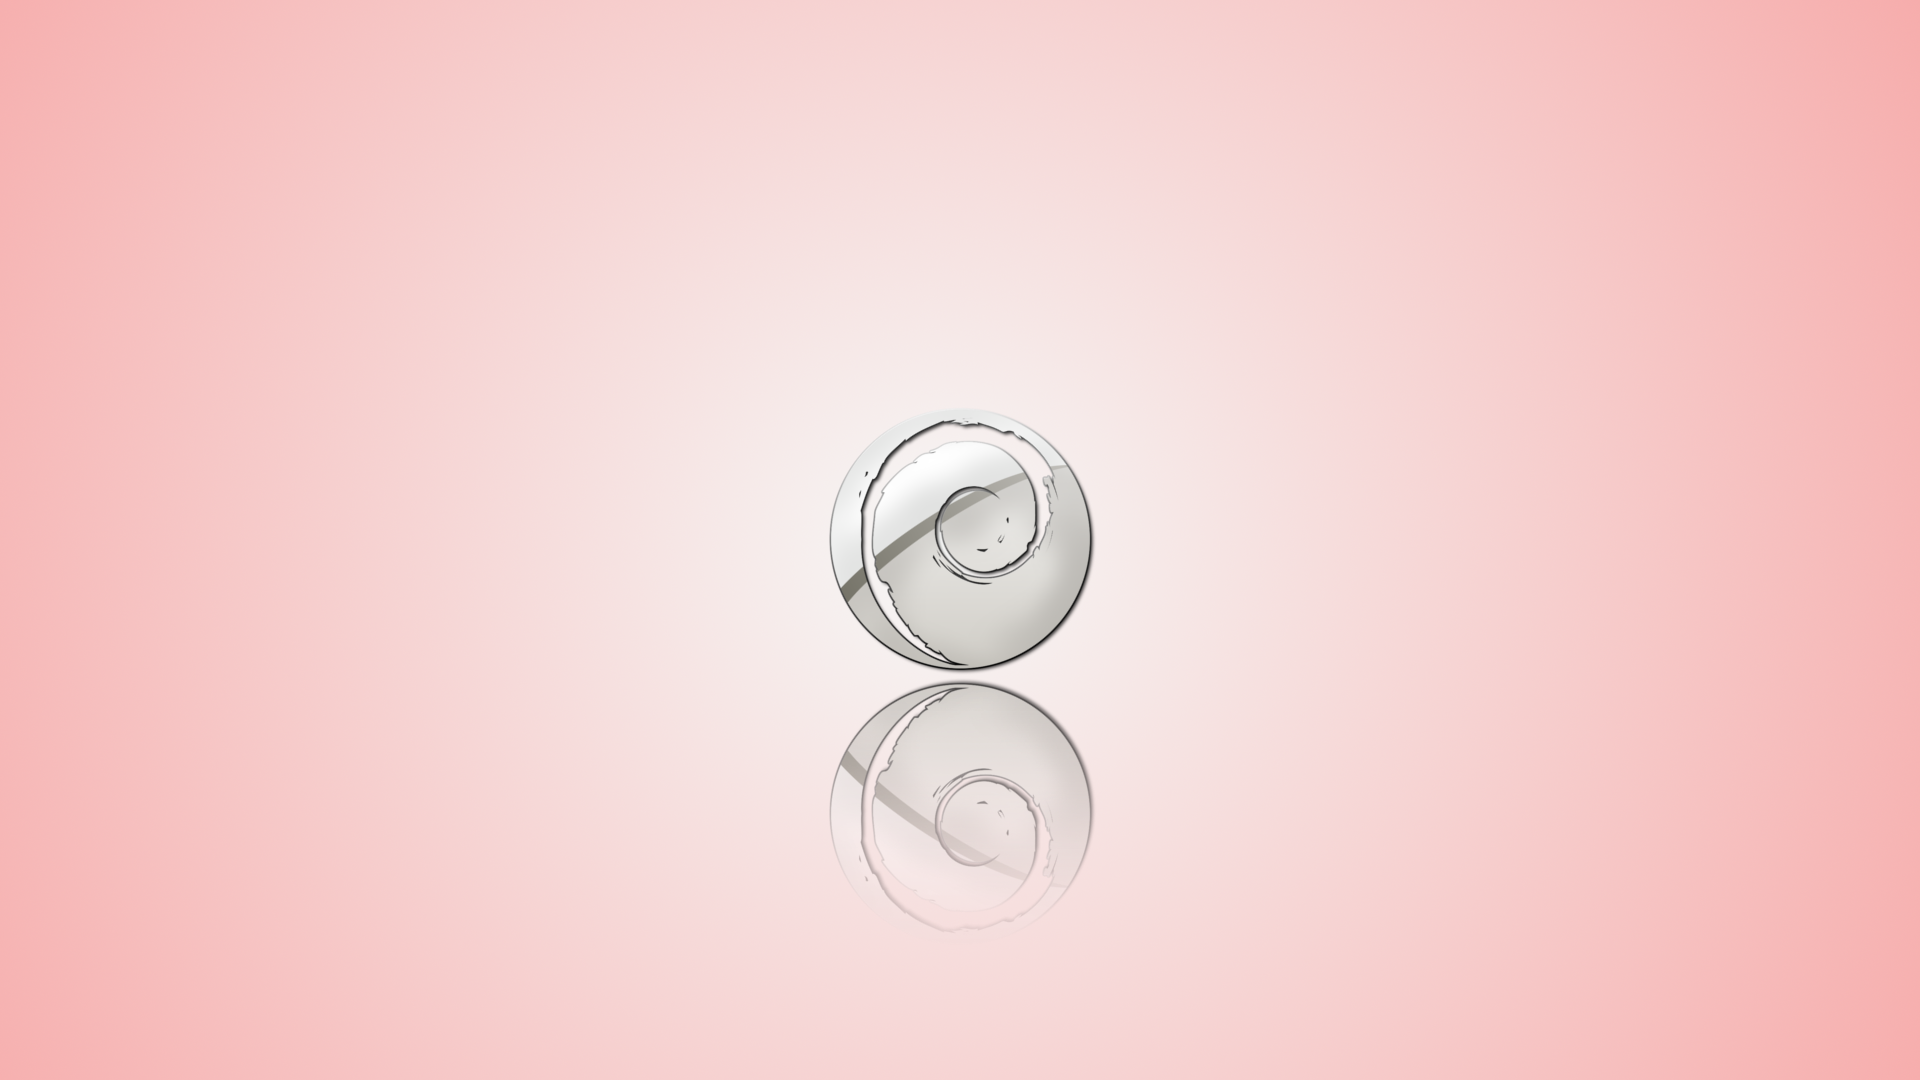 Linux Debian Pink Background Circle Simple Background Gradient Reflection 1920x1080